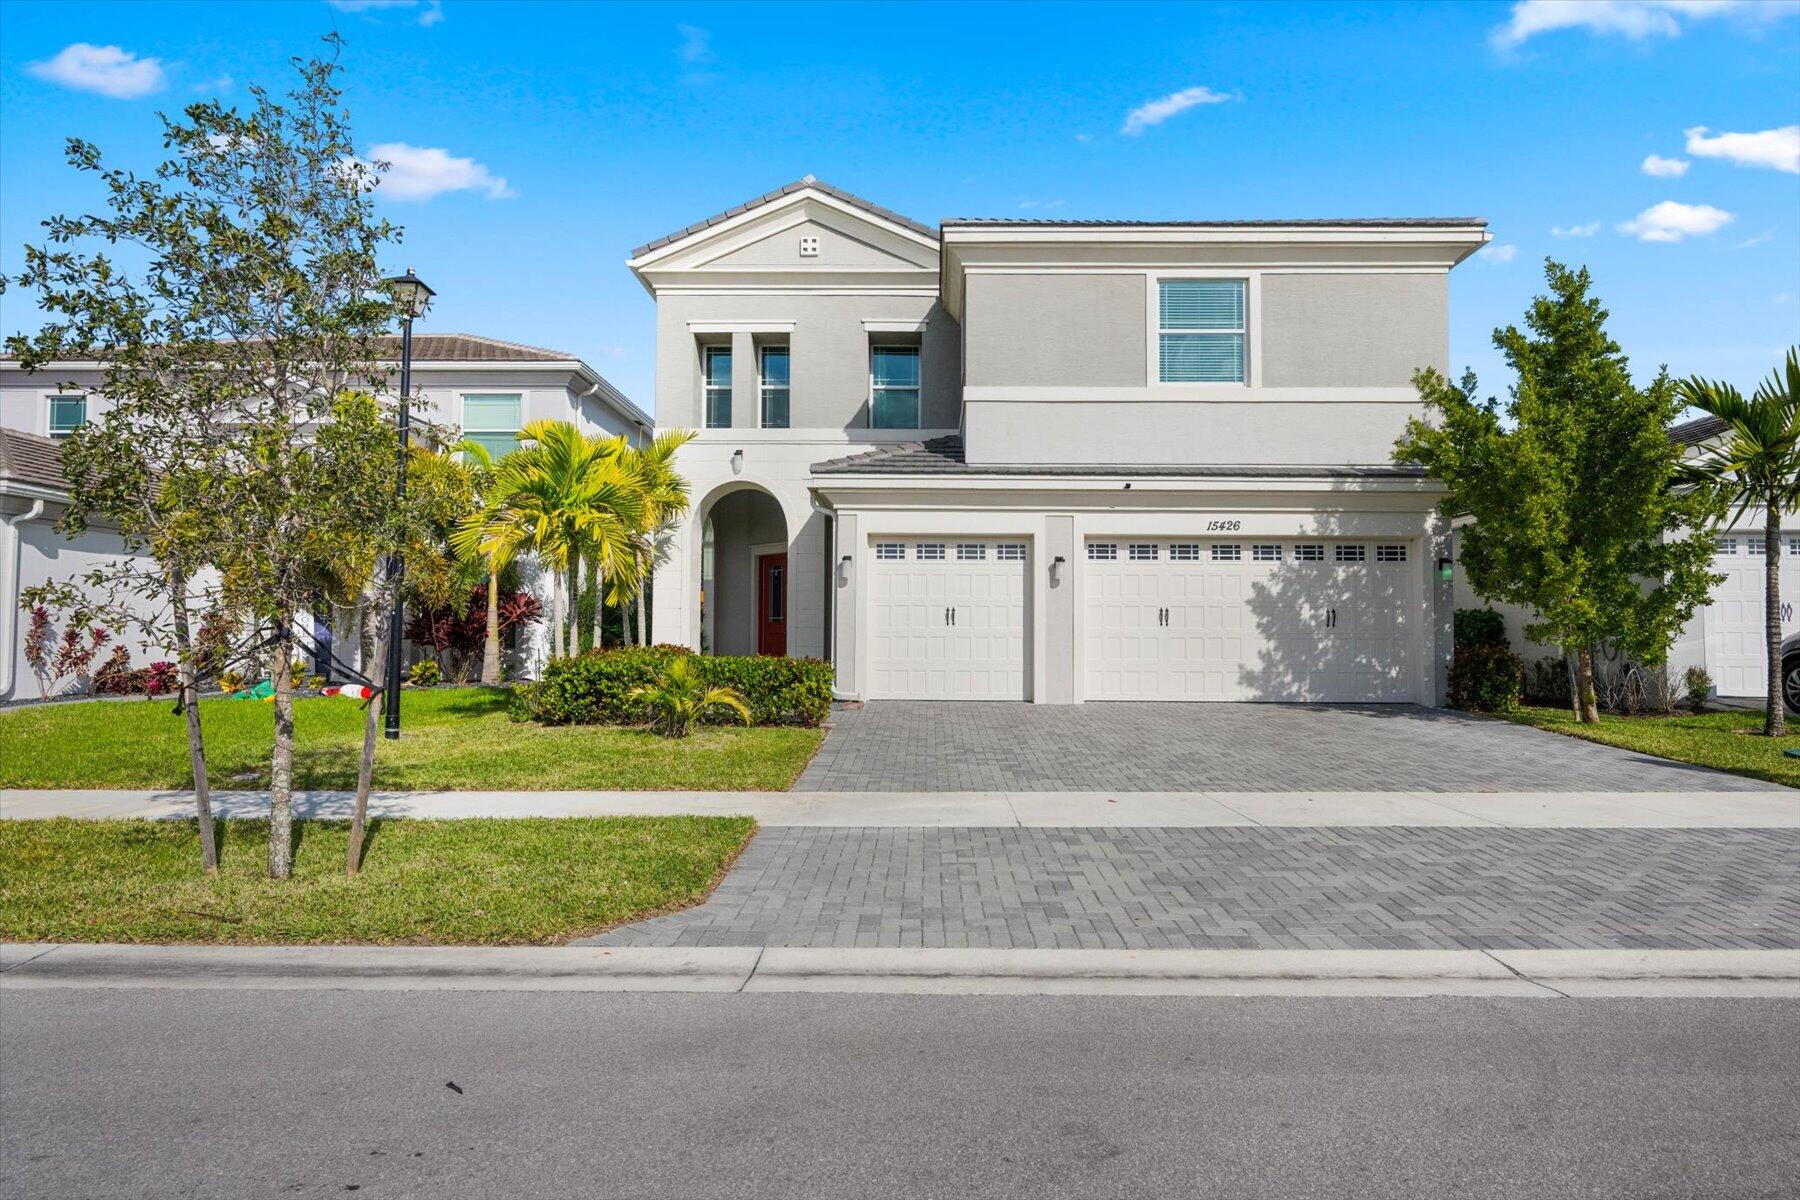 15426 Goldfinch Circle, Westlake, Palm Beach County, Florida - 6 Bedrooms  
4 Bathrooms - 